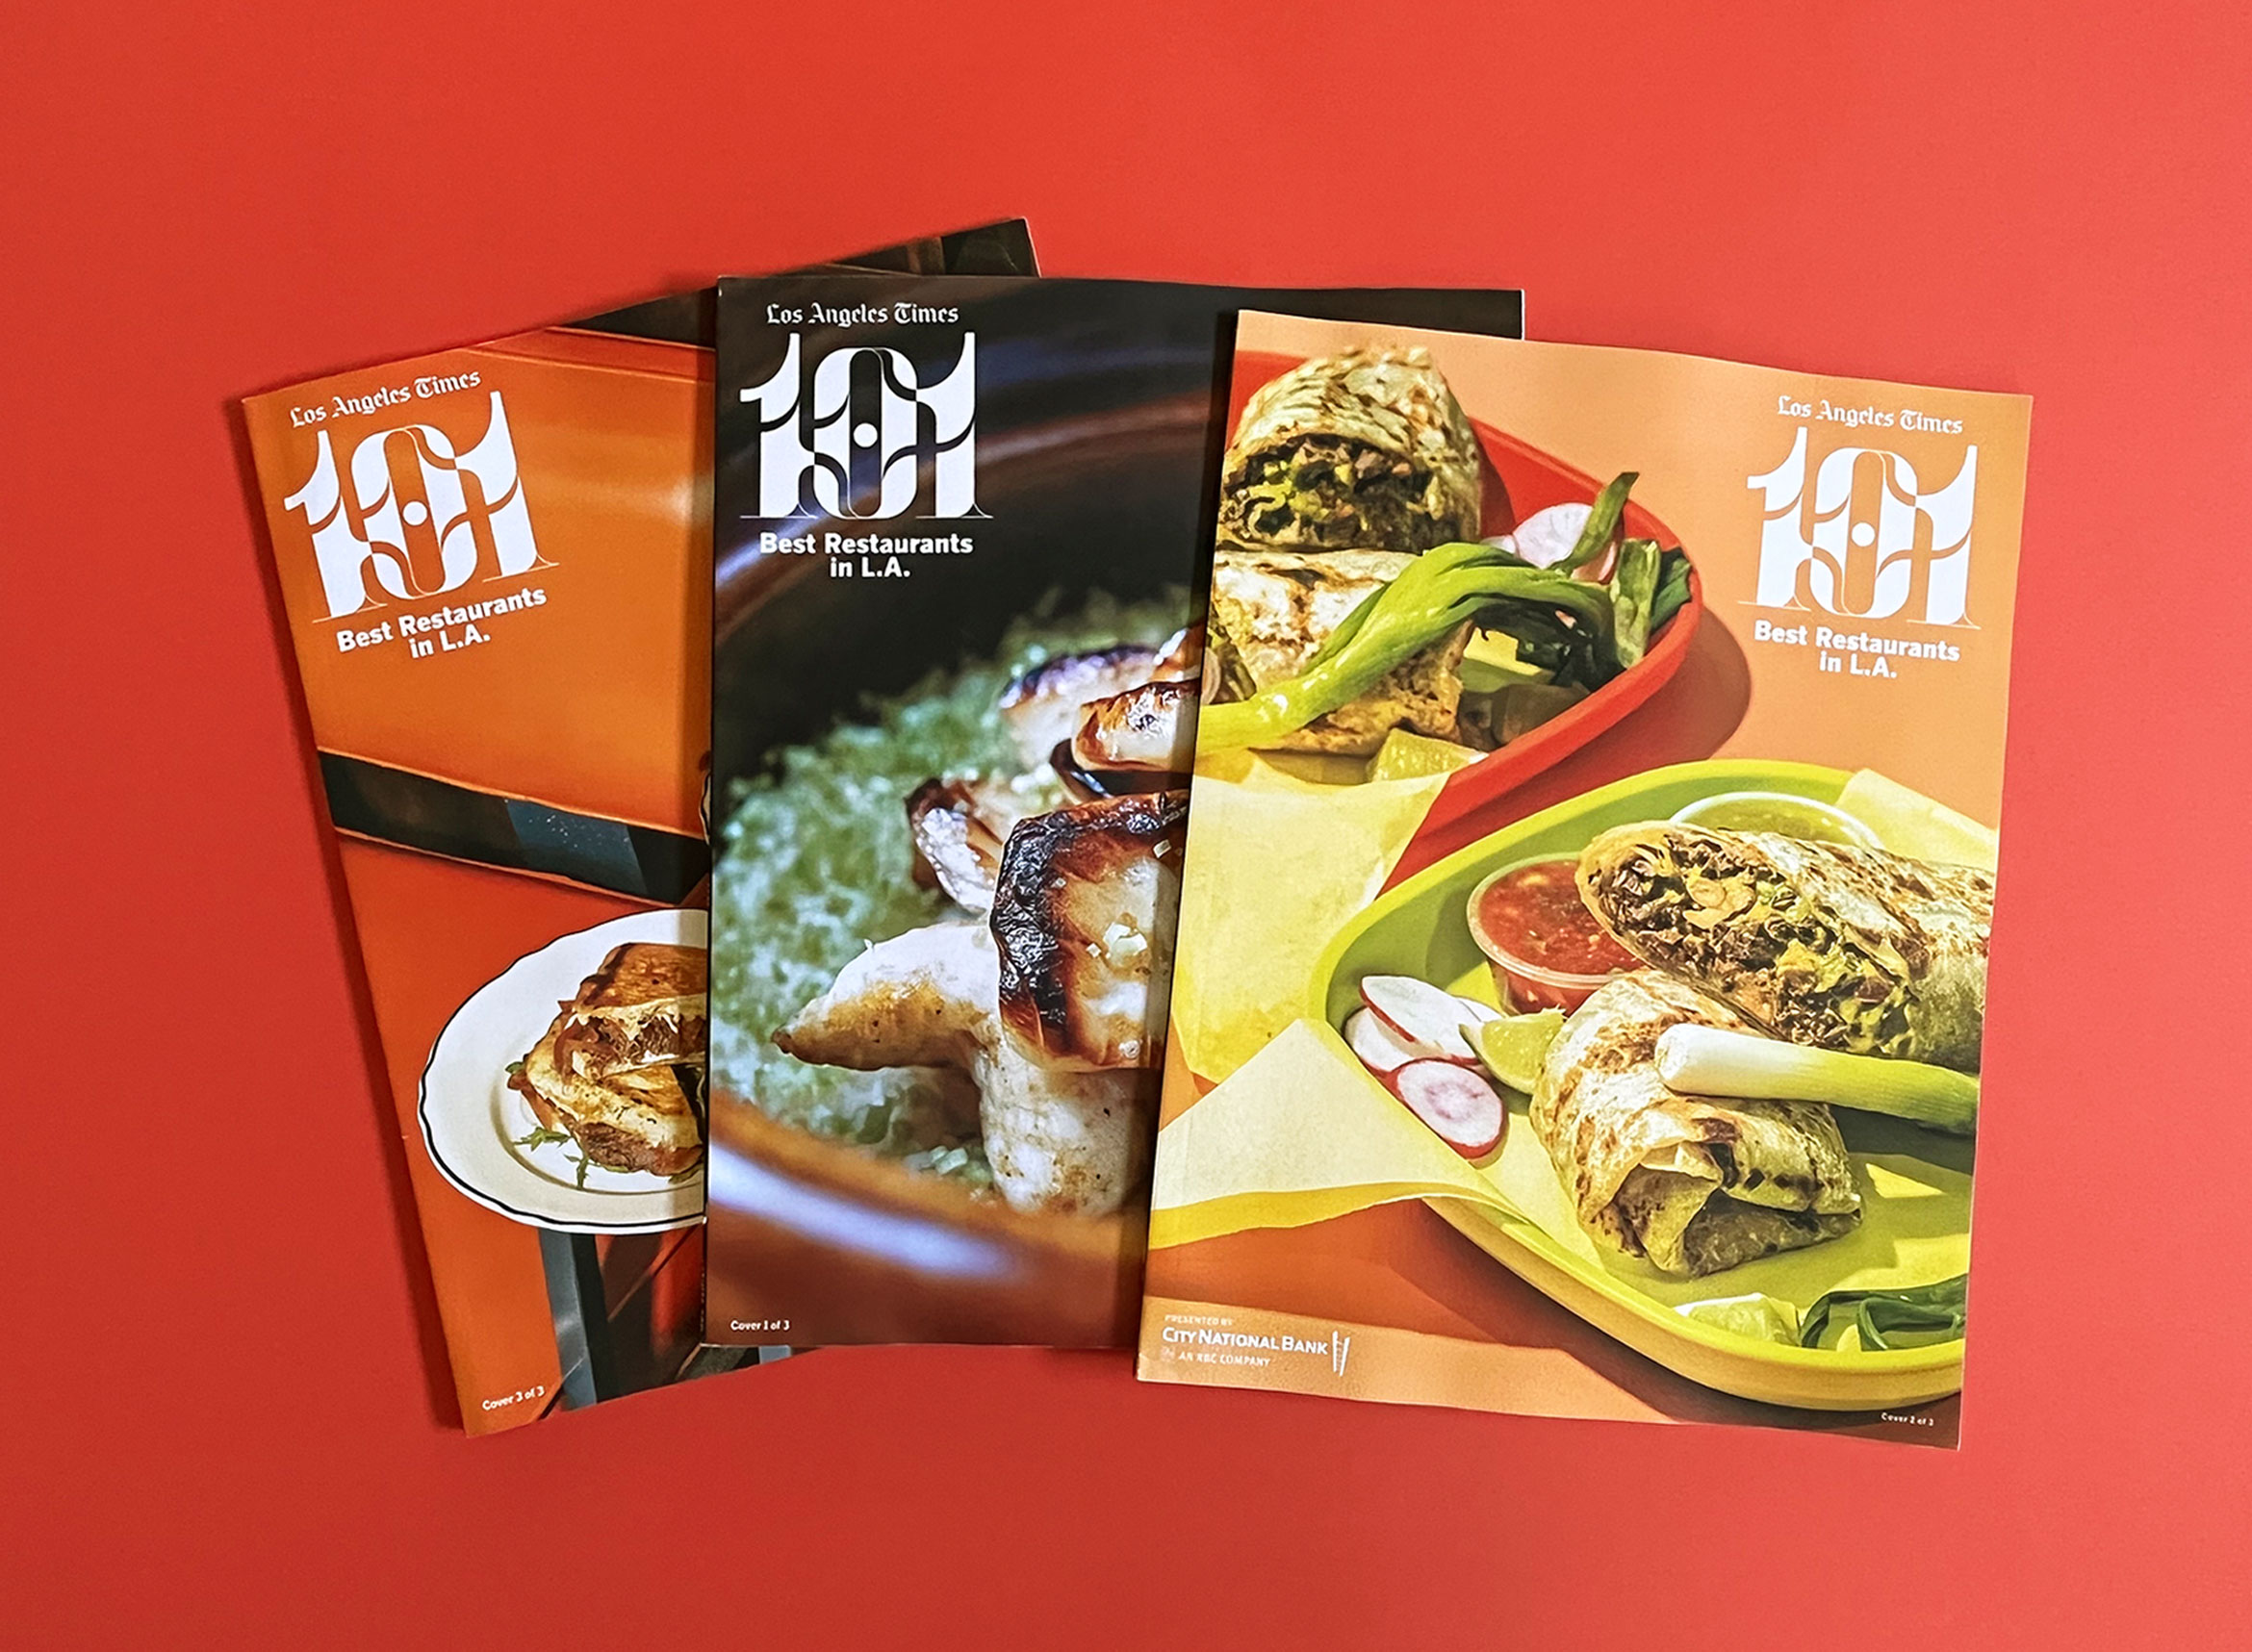 3 101 best restaurants magazines fanned out on red backdrop